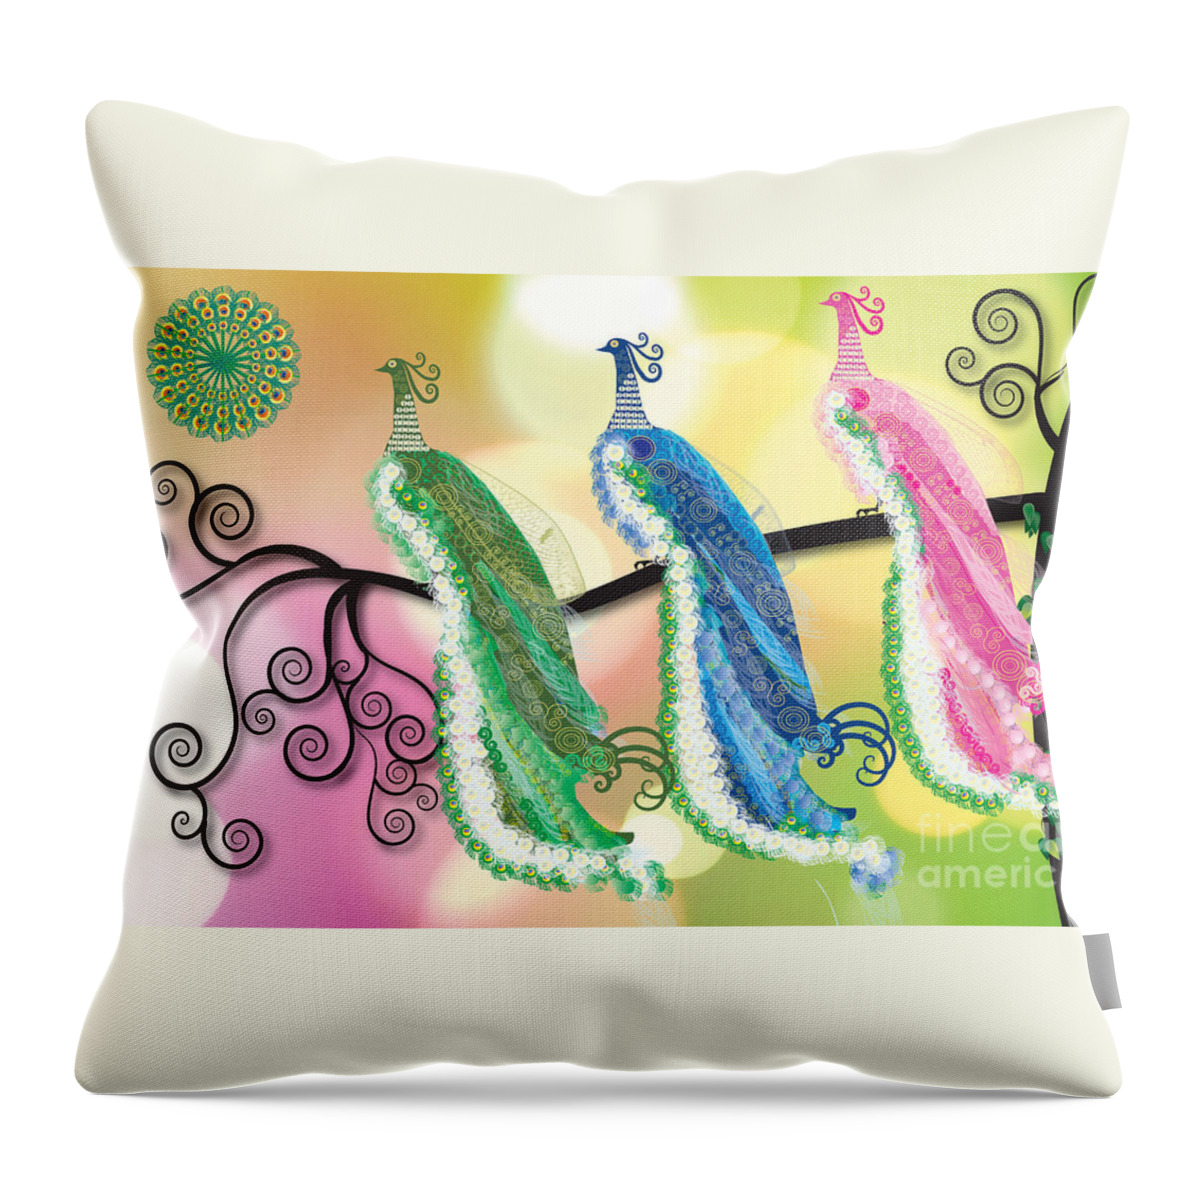 Peacocks Throw Pillow featuring the digital art Visionary Peacocks by Kim Prowse